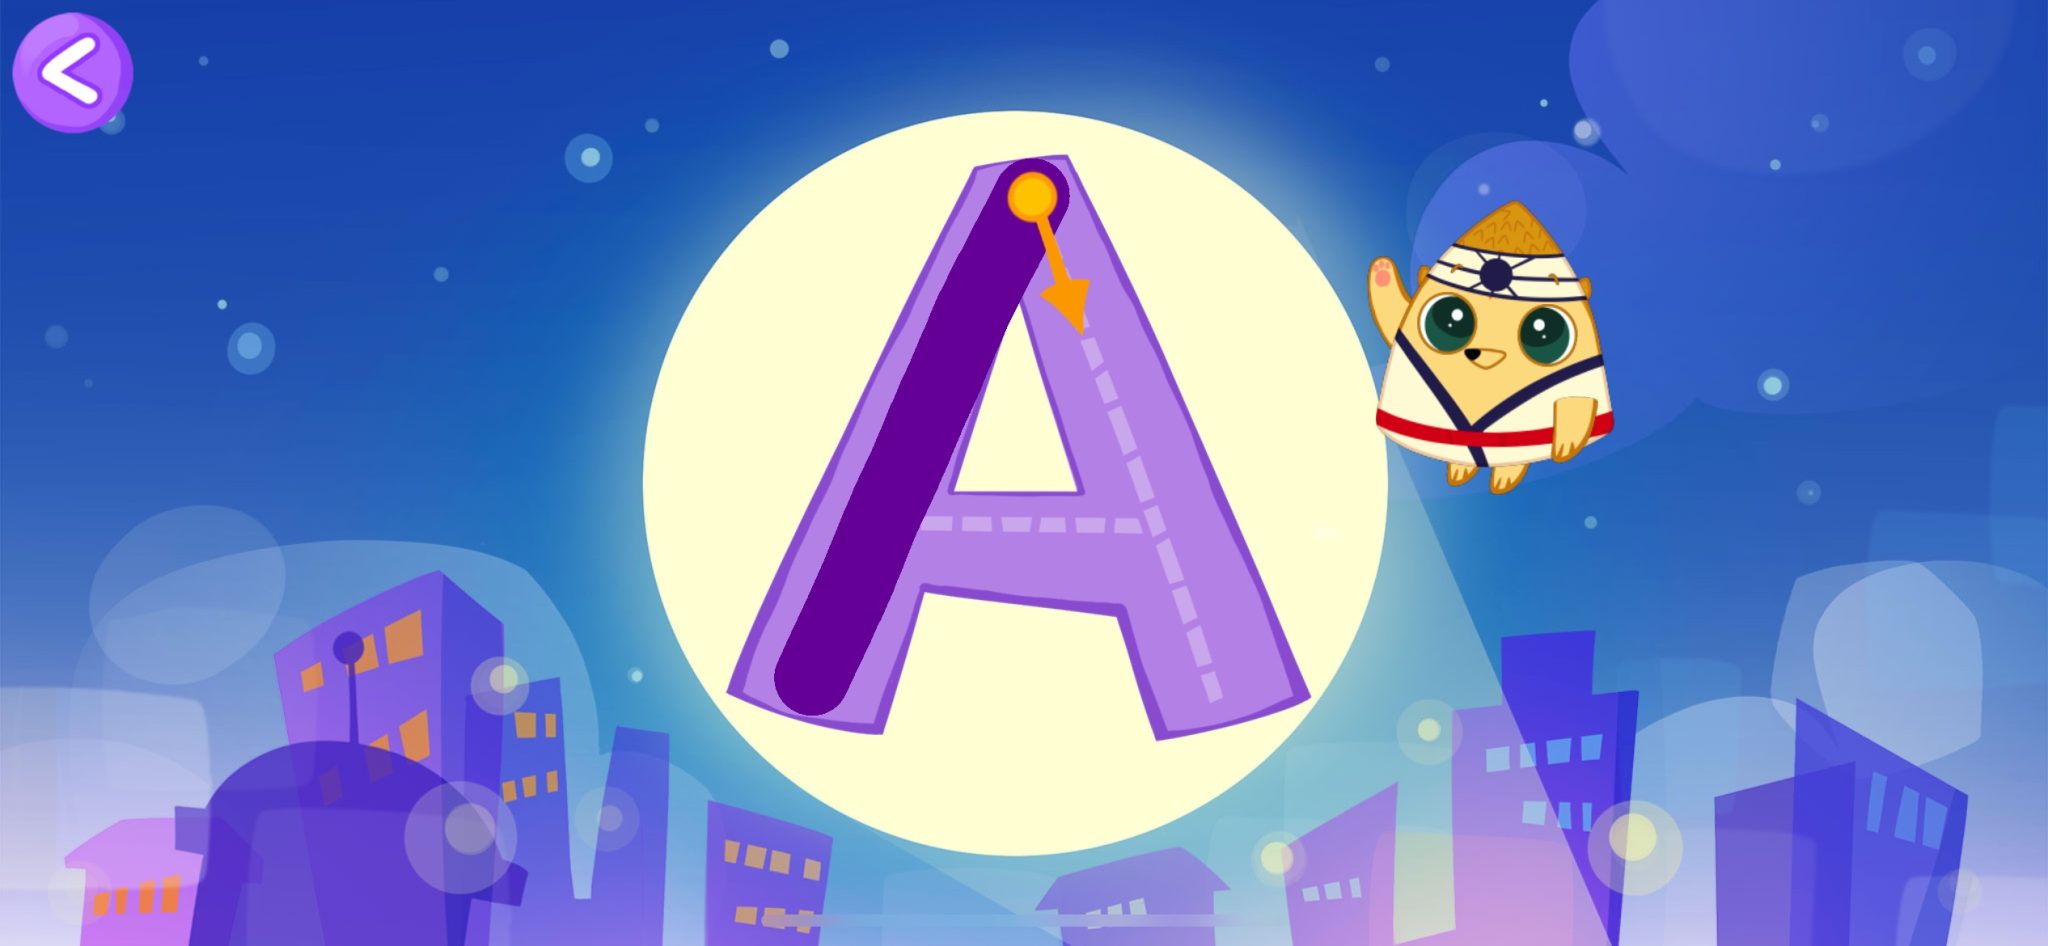 11-free-alphabet-apps-for-kids-android-ios-freeappsforme-free